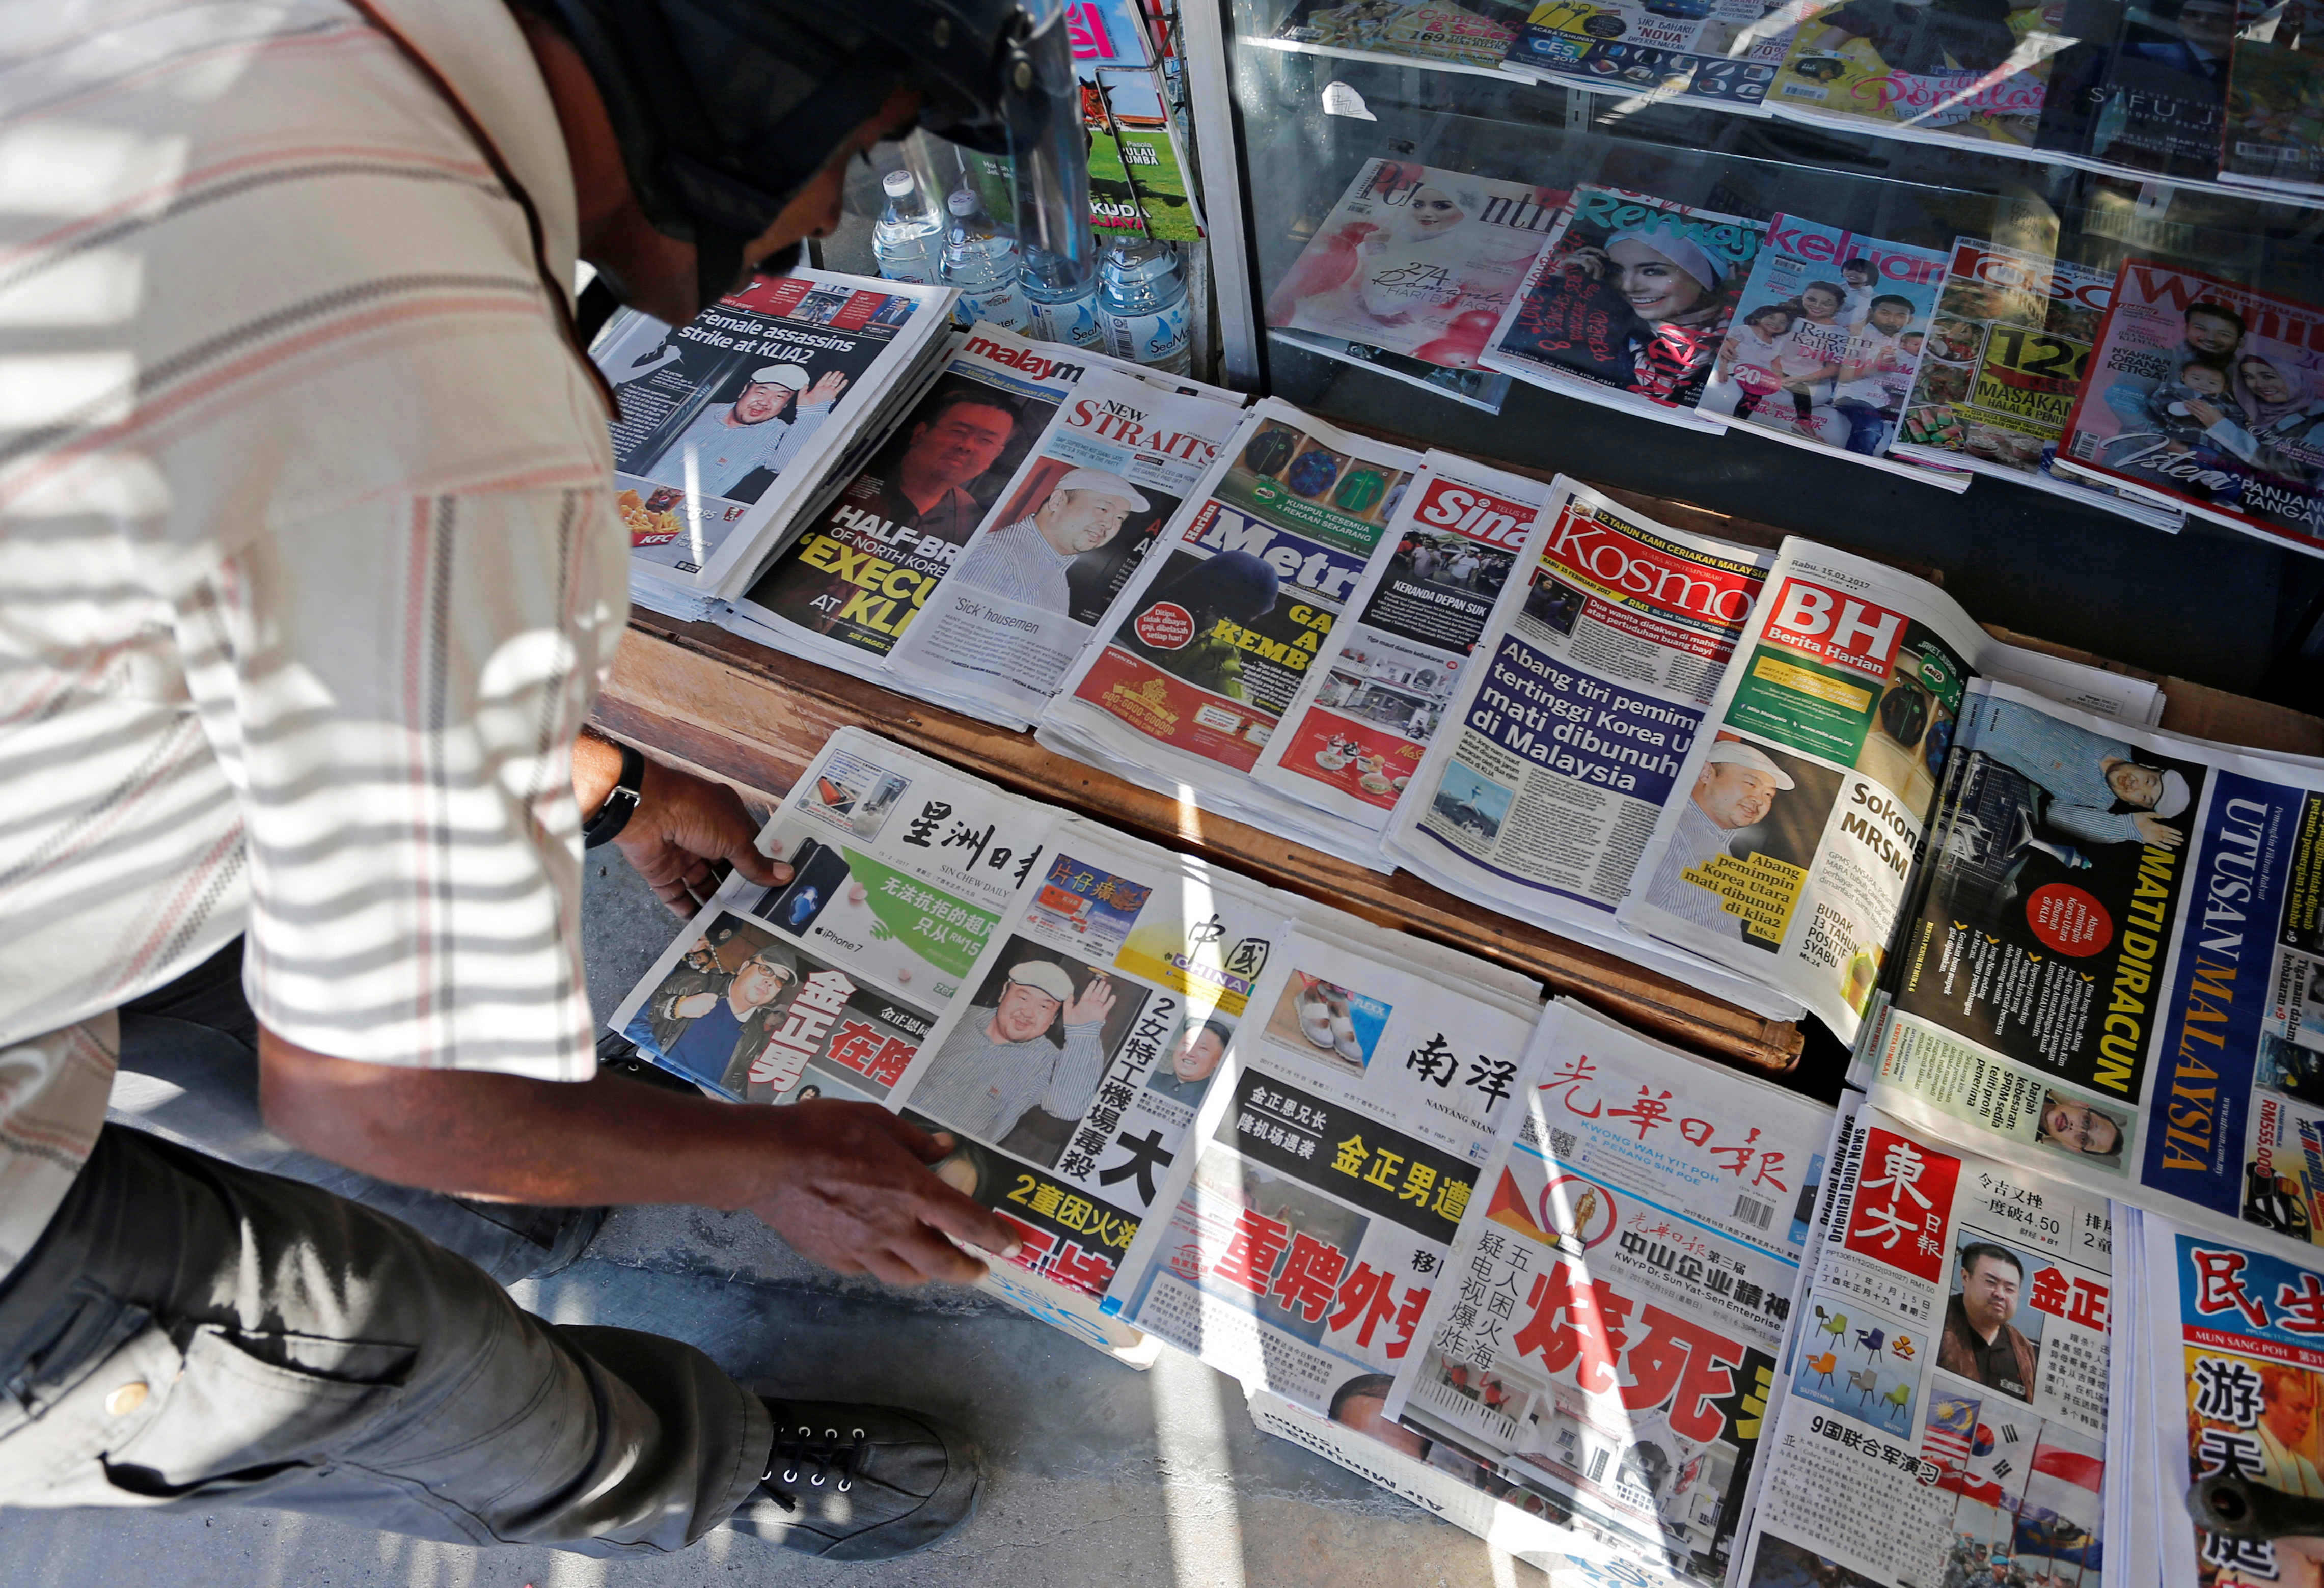 A newspaper vendor arranges newspapers showing front pages reporting the death of Kim Jong Nam, at a newsstand outside Kuala Lumpur on Feb. 15, 2017 (Lai Seng Sin—Reuters)